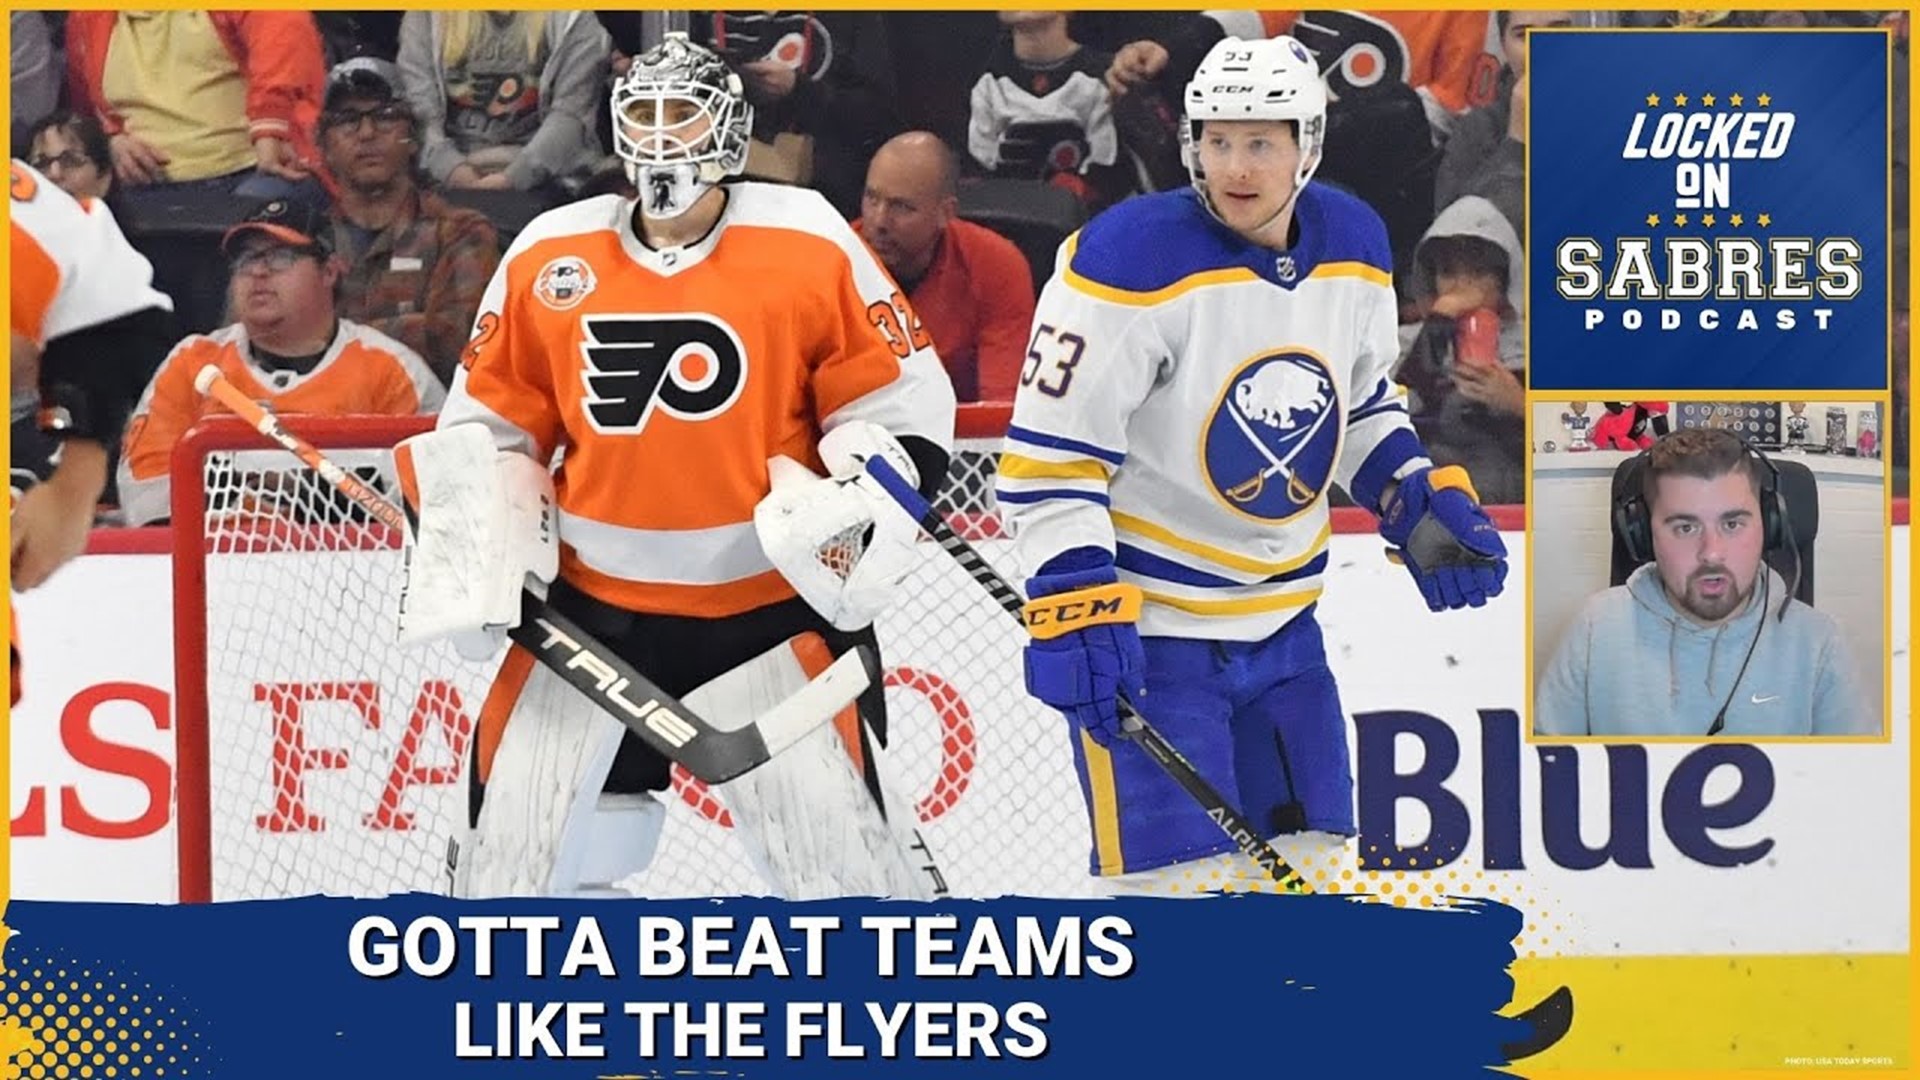 Sabres need to beat teams like the Flyers